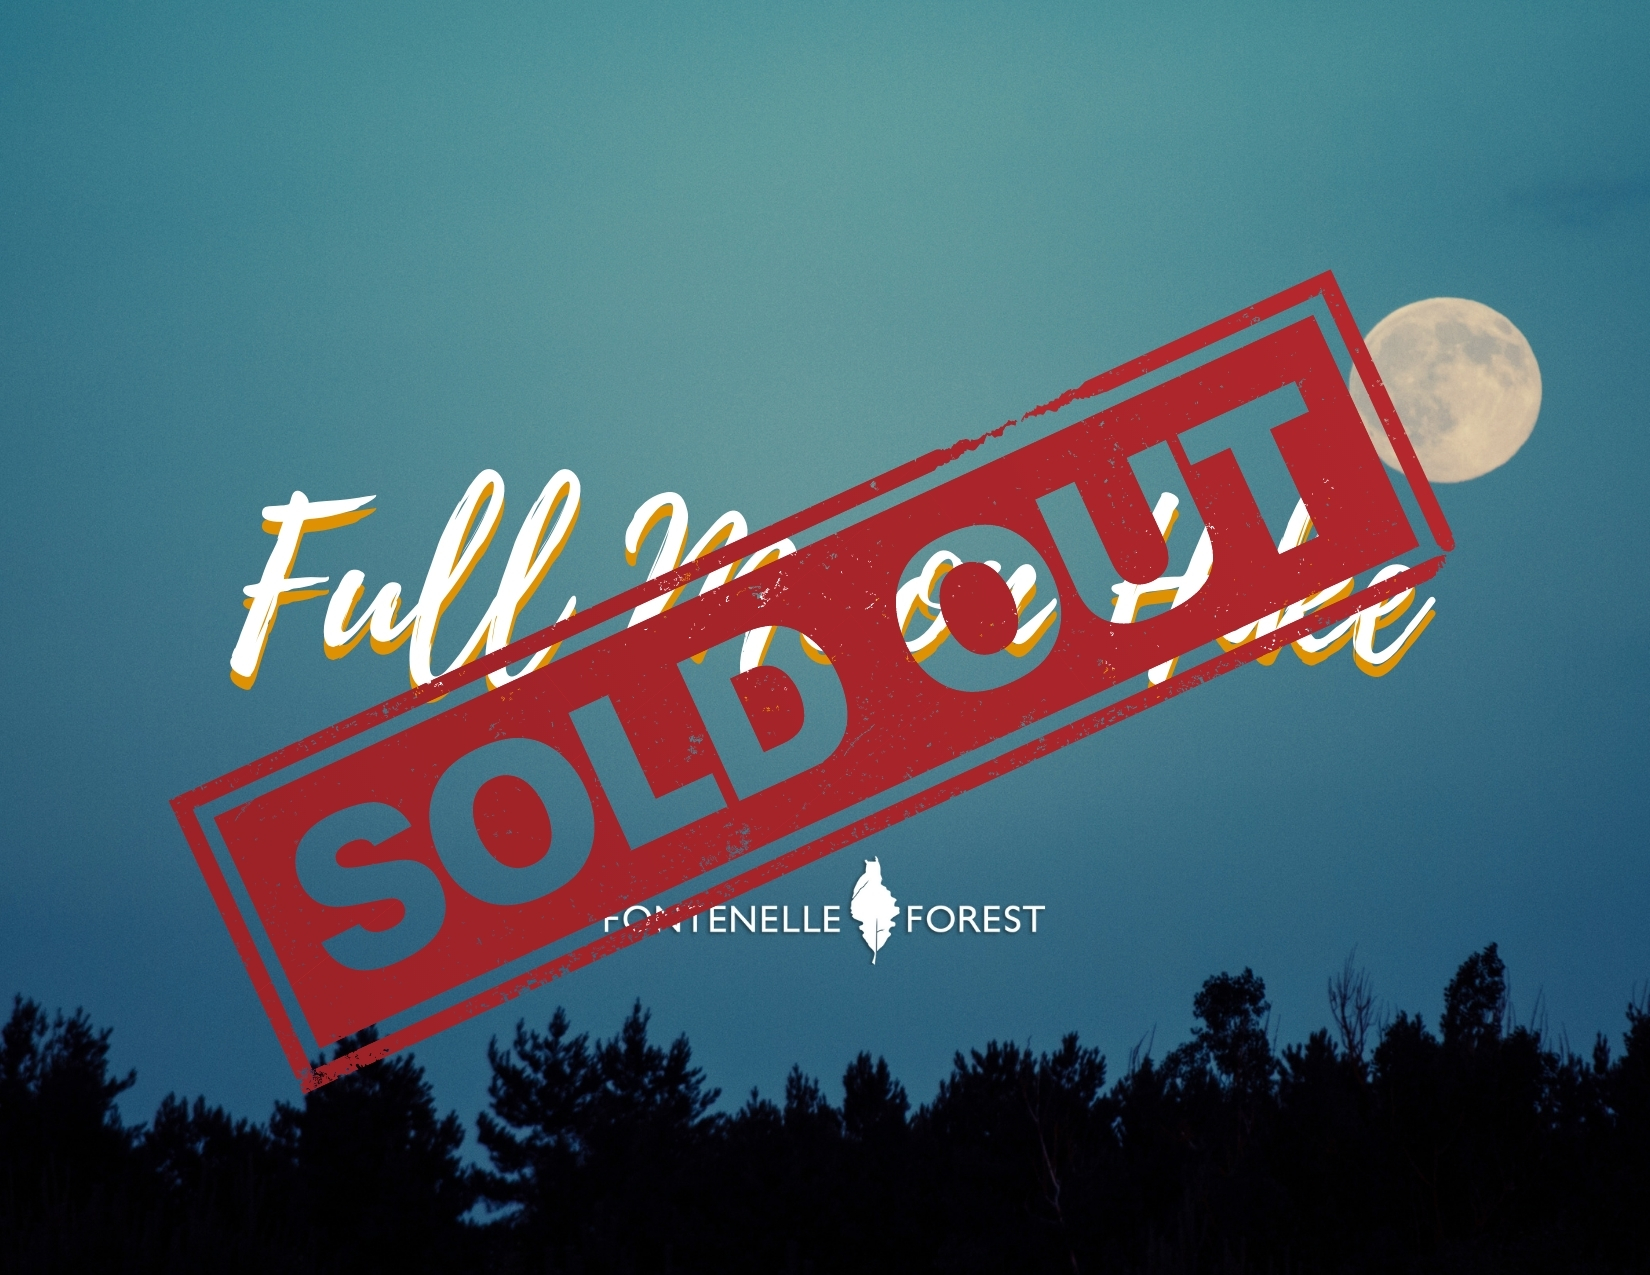 An image of the treetops and the full moon against a night sky overlayed by the words "Full Moon Hikes at the Forest" and the Fontenelle Forest logo. This image is overlayed by a large red stamp displaying the words "Sold Out."